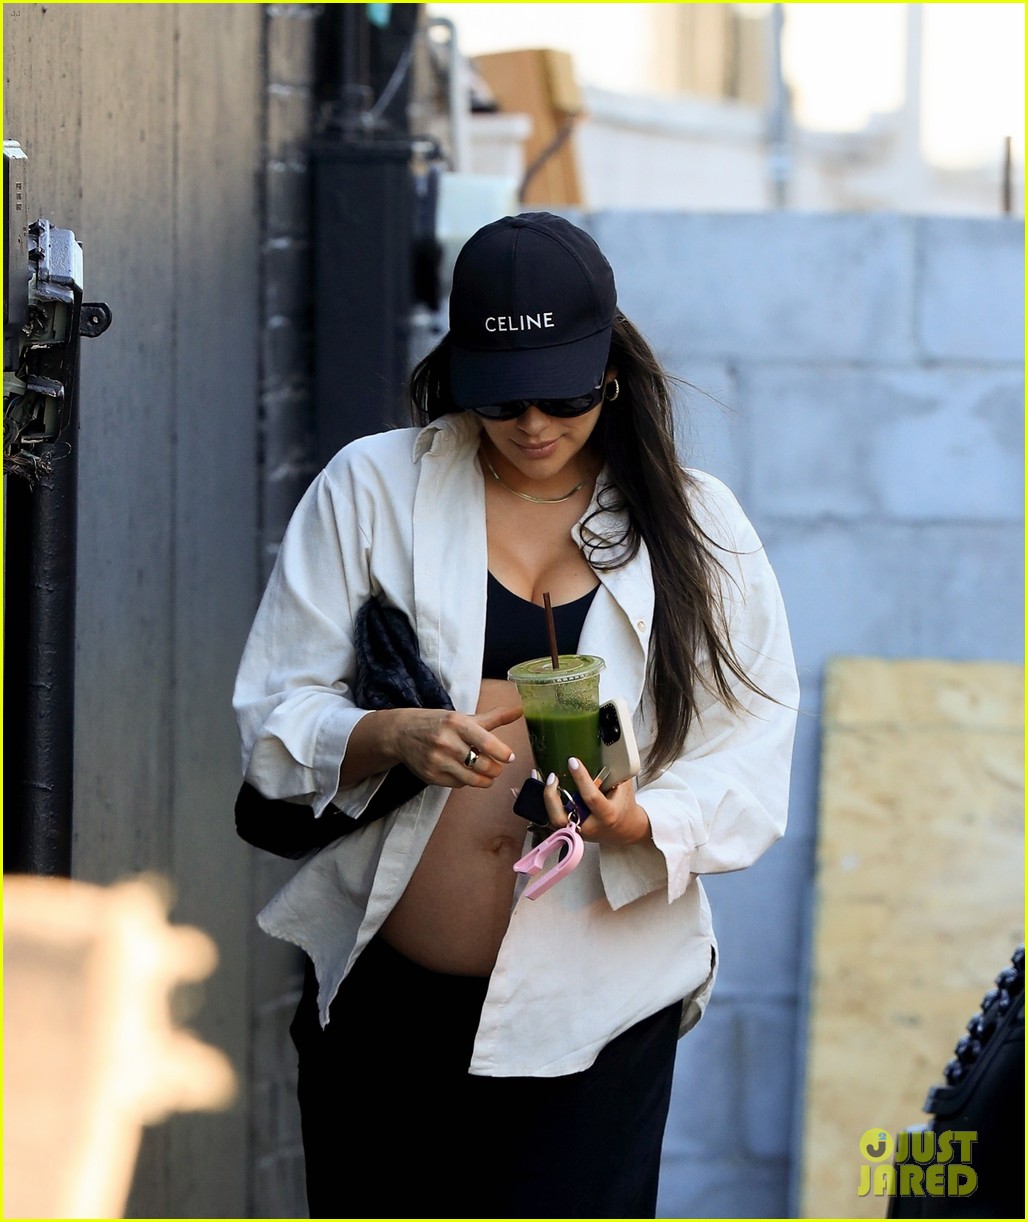 Pregnant Shay Mitchell Wears Sports Bra to Appointment in Beverly